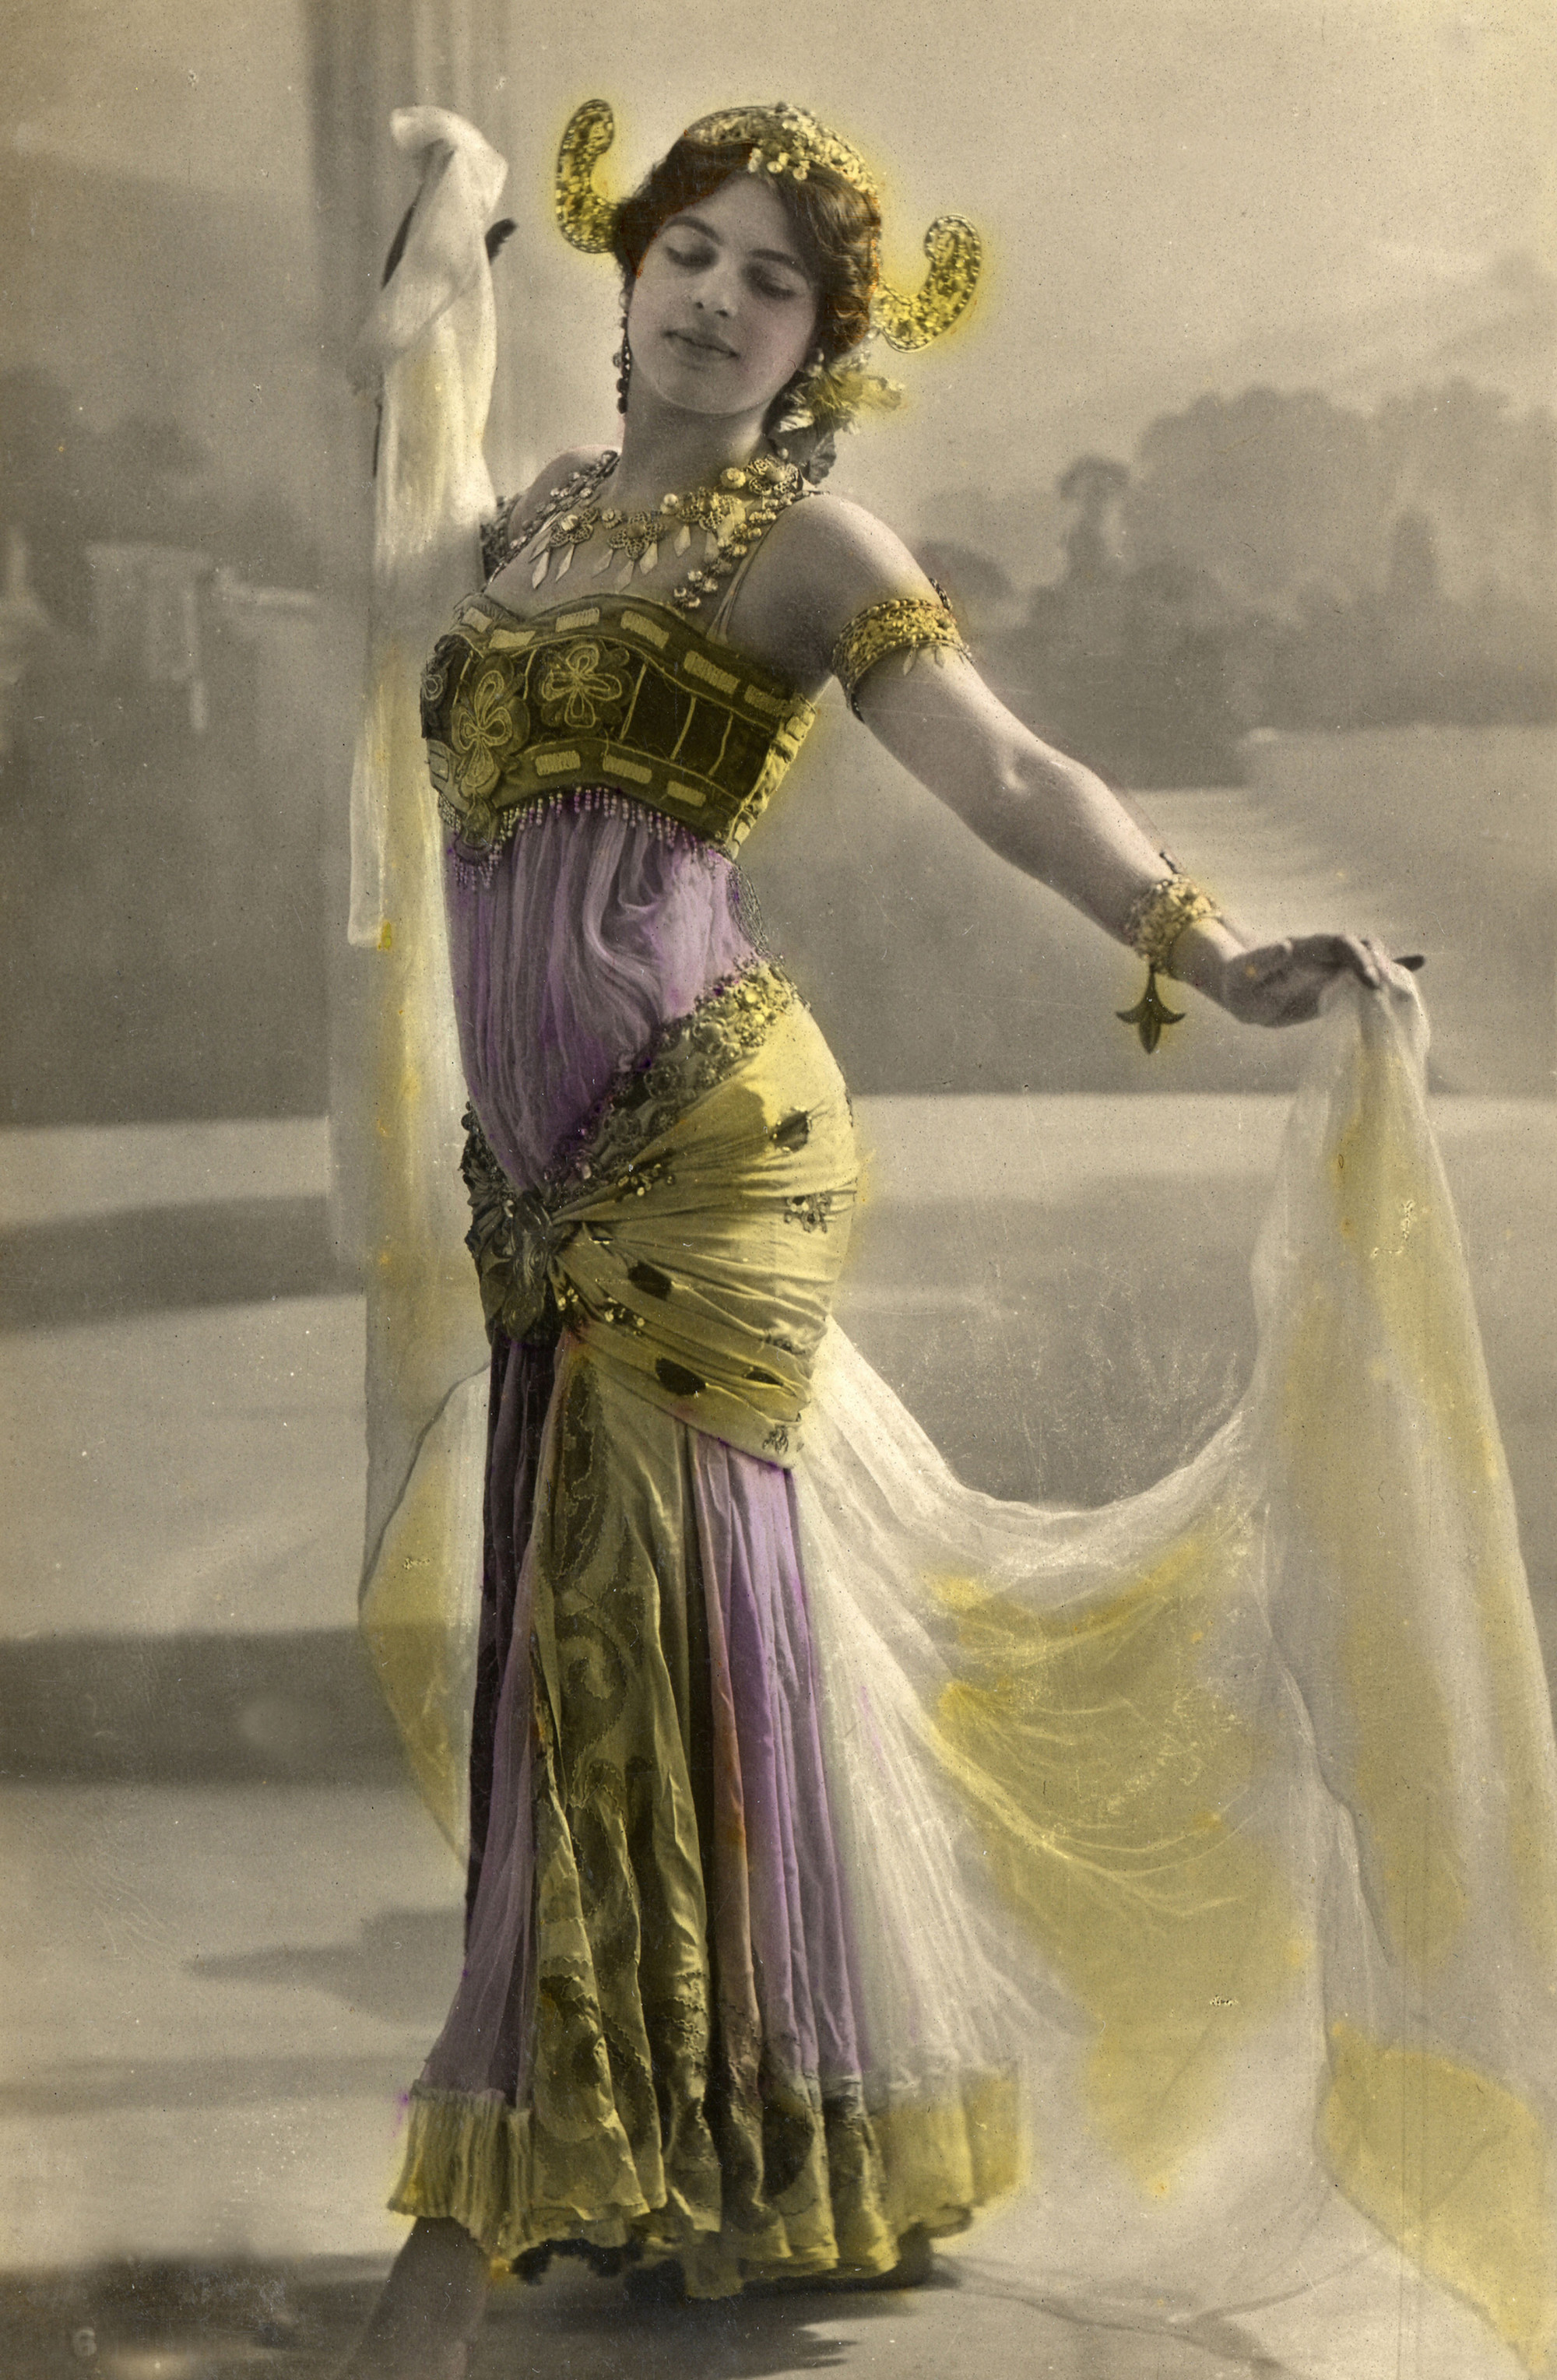 Mata Hari In Photos: The Ultimate Femme Fatale and Woman of Courage